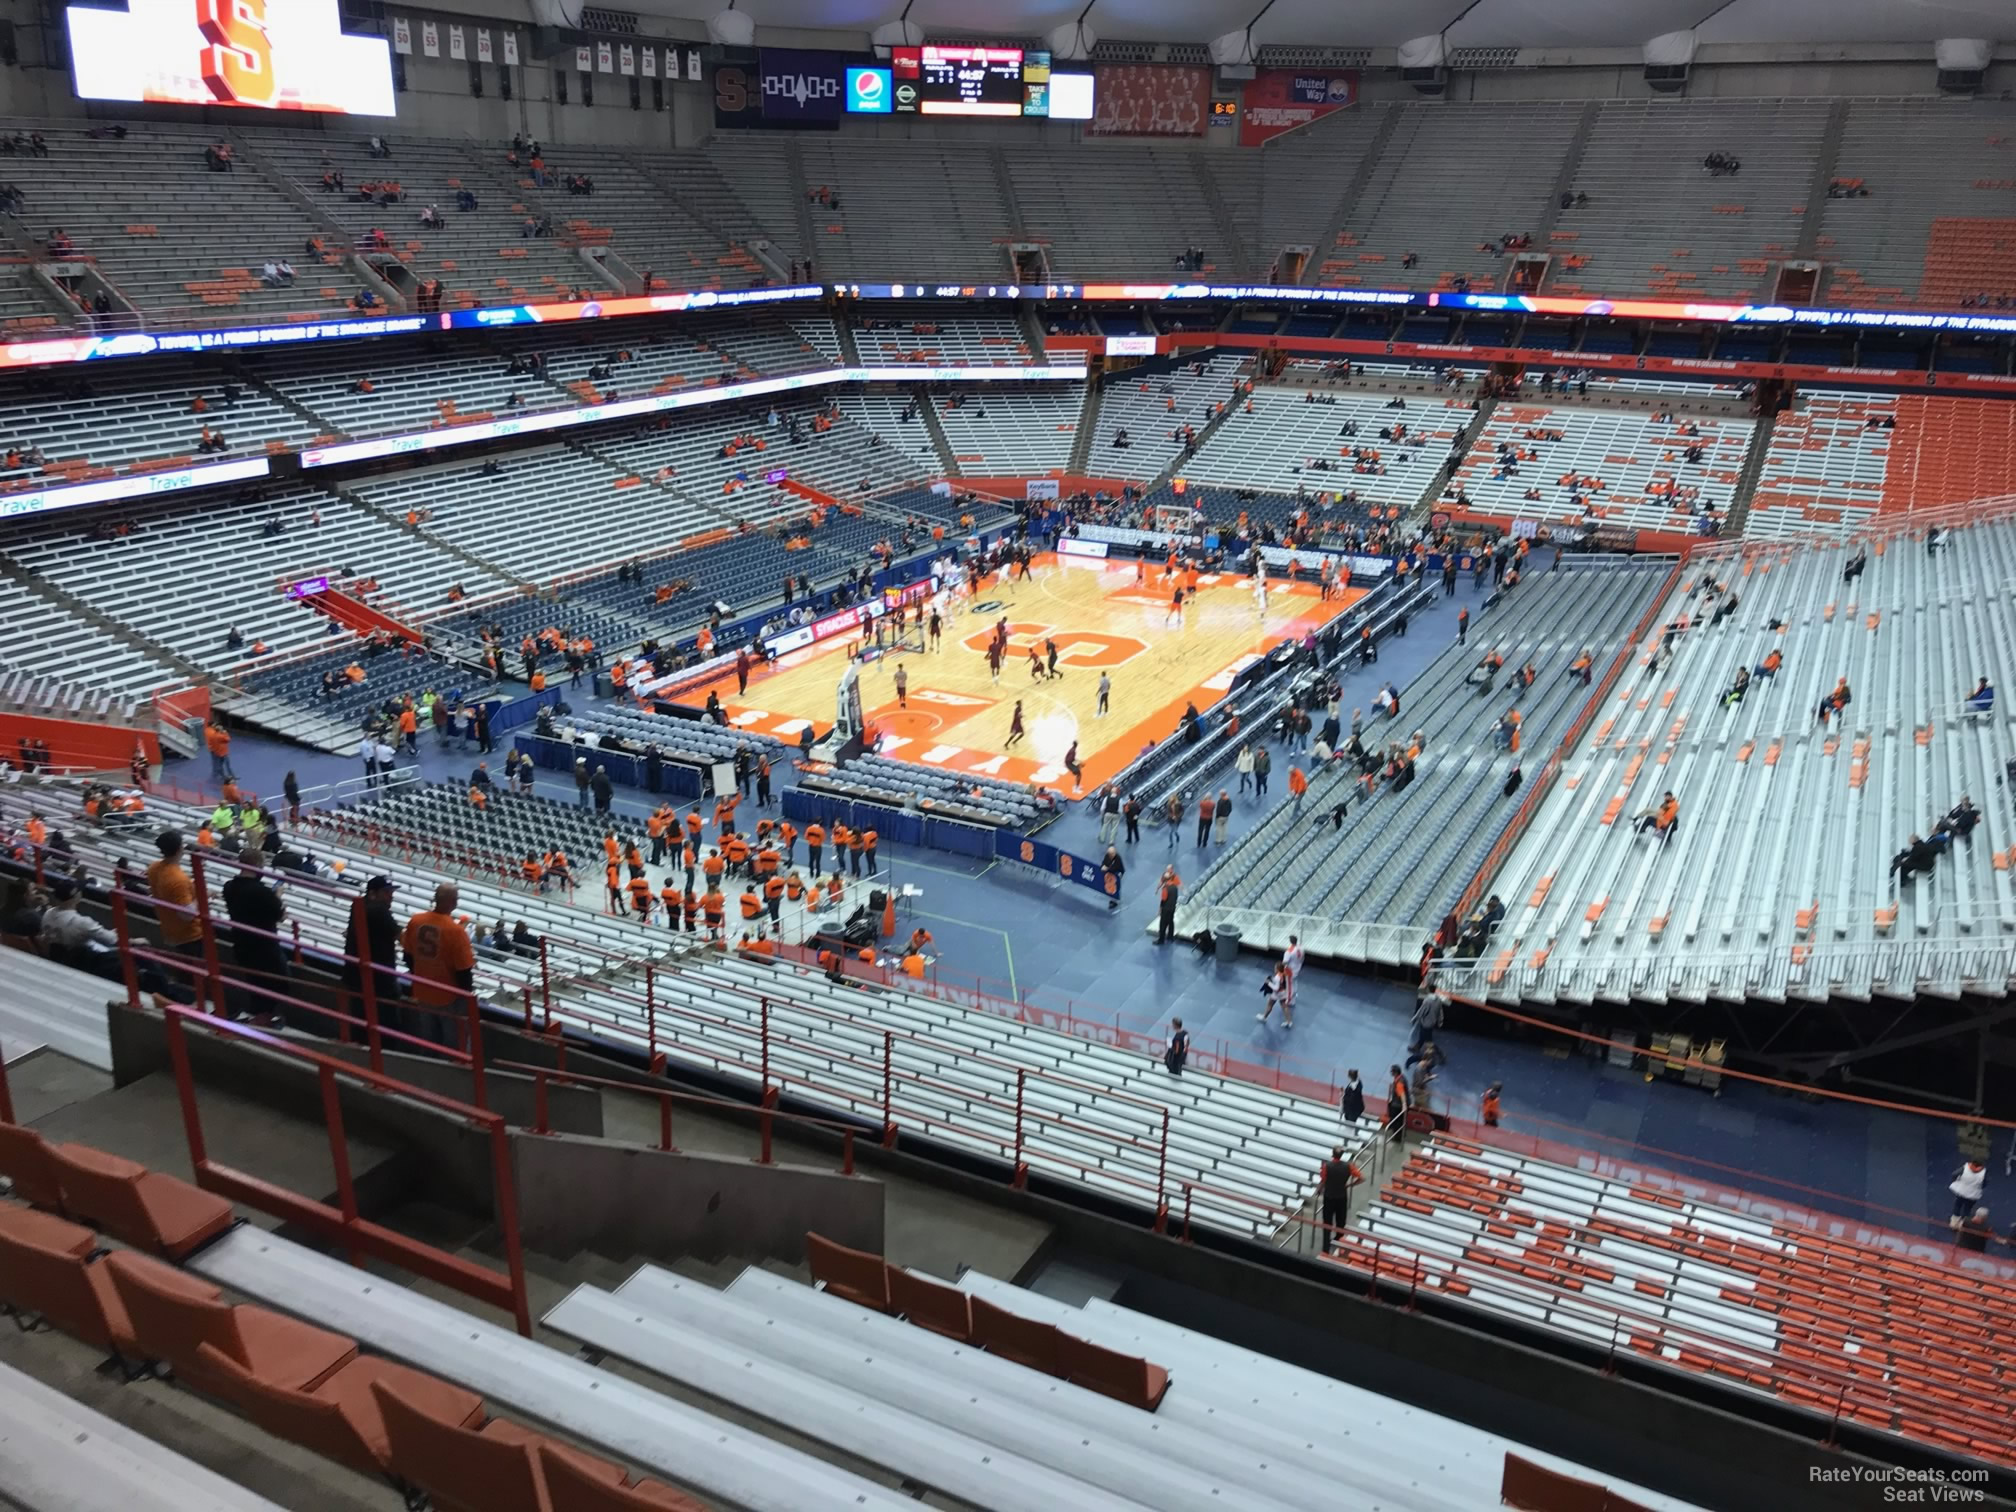 section 301, row m seat view  for basketball - carrier dome